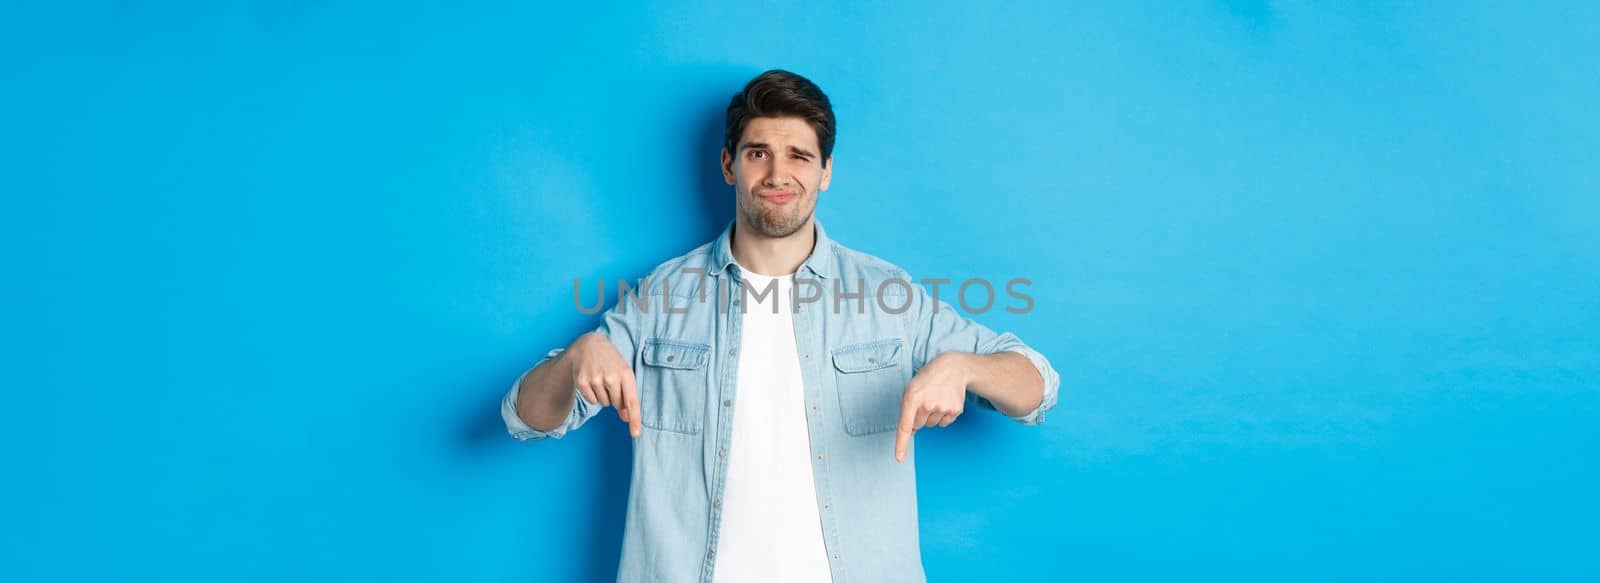 Disappointed guy in casual outfit, pointing fingers down with doubtful grimace, standing against blue background.